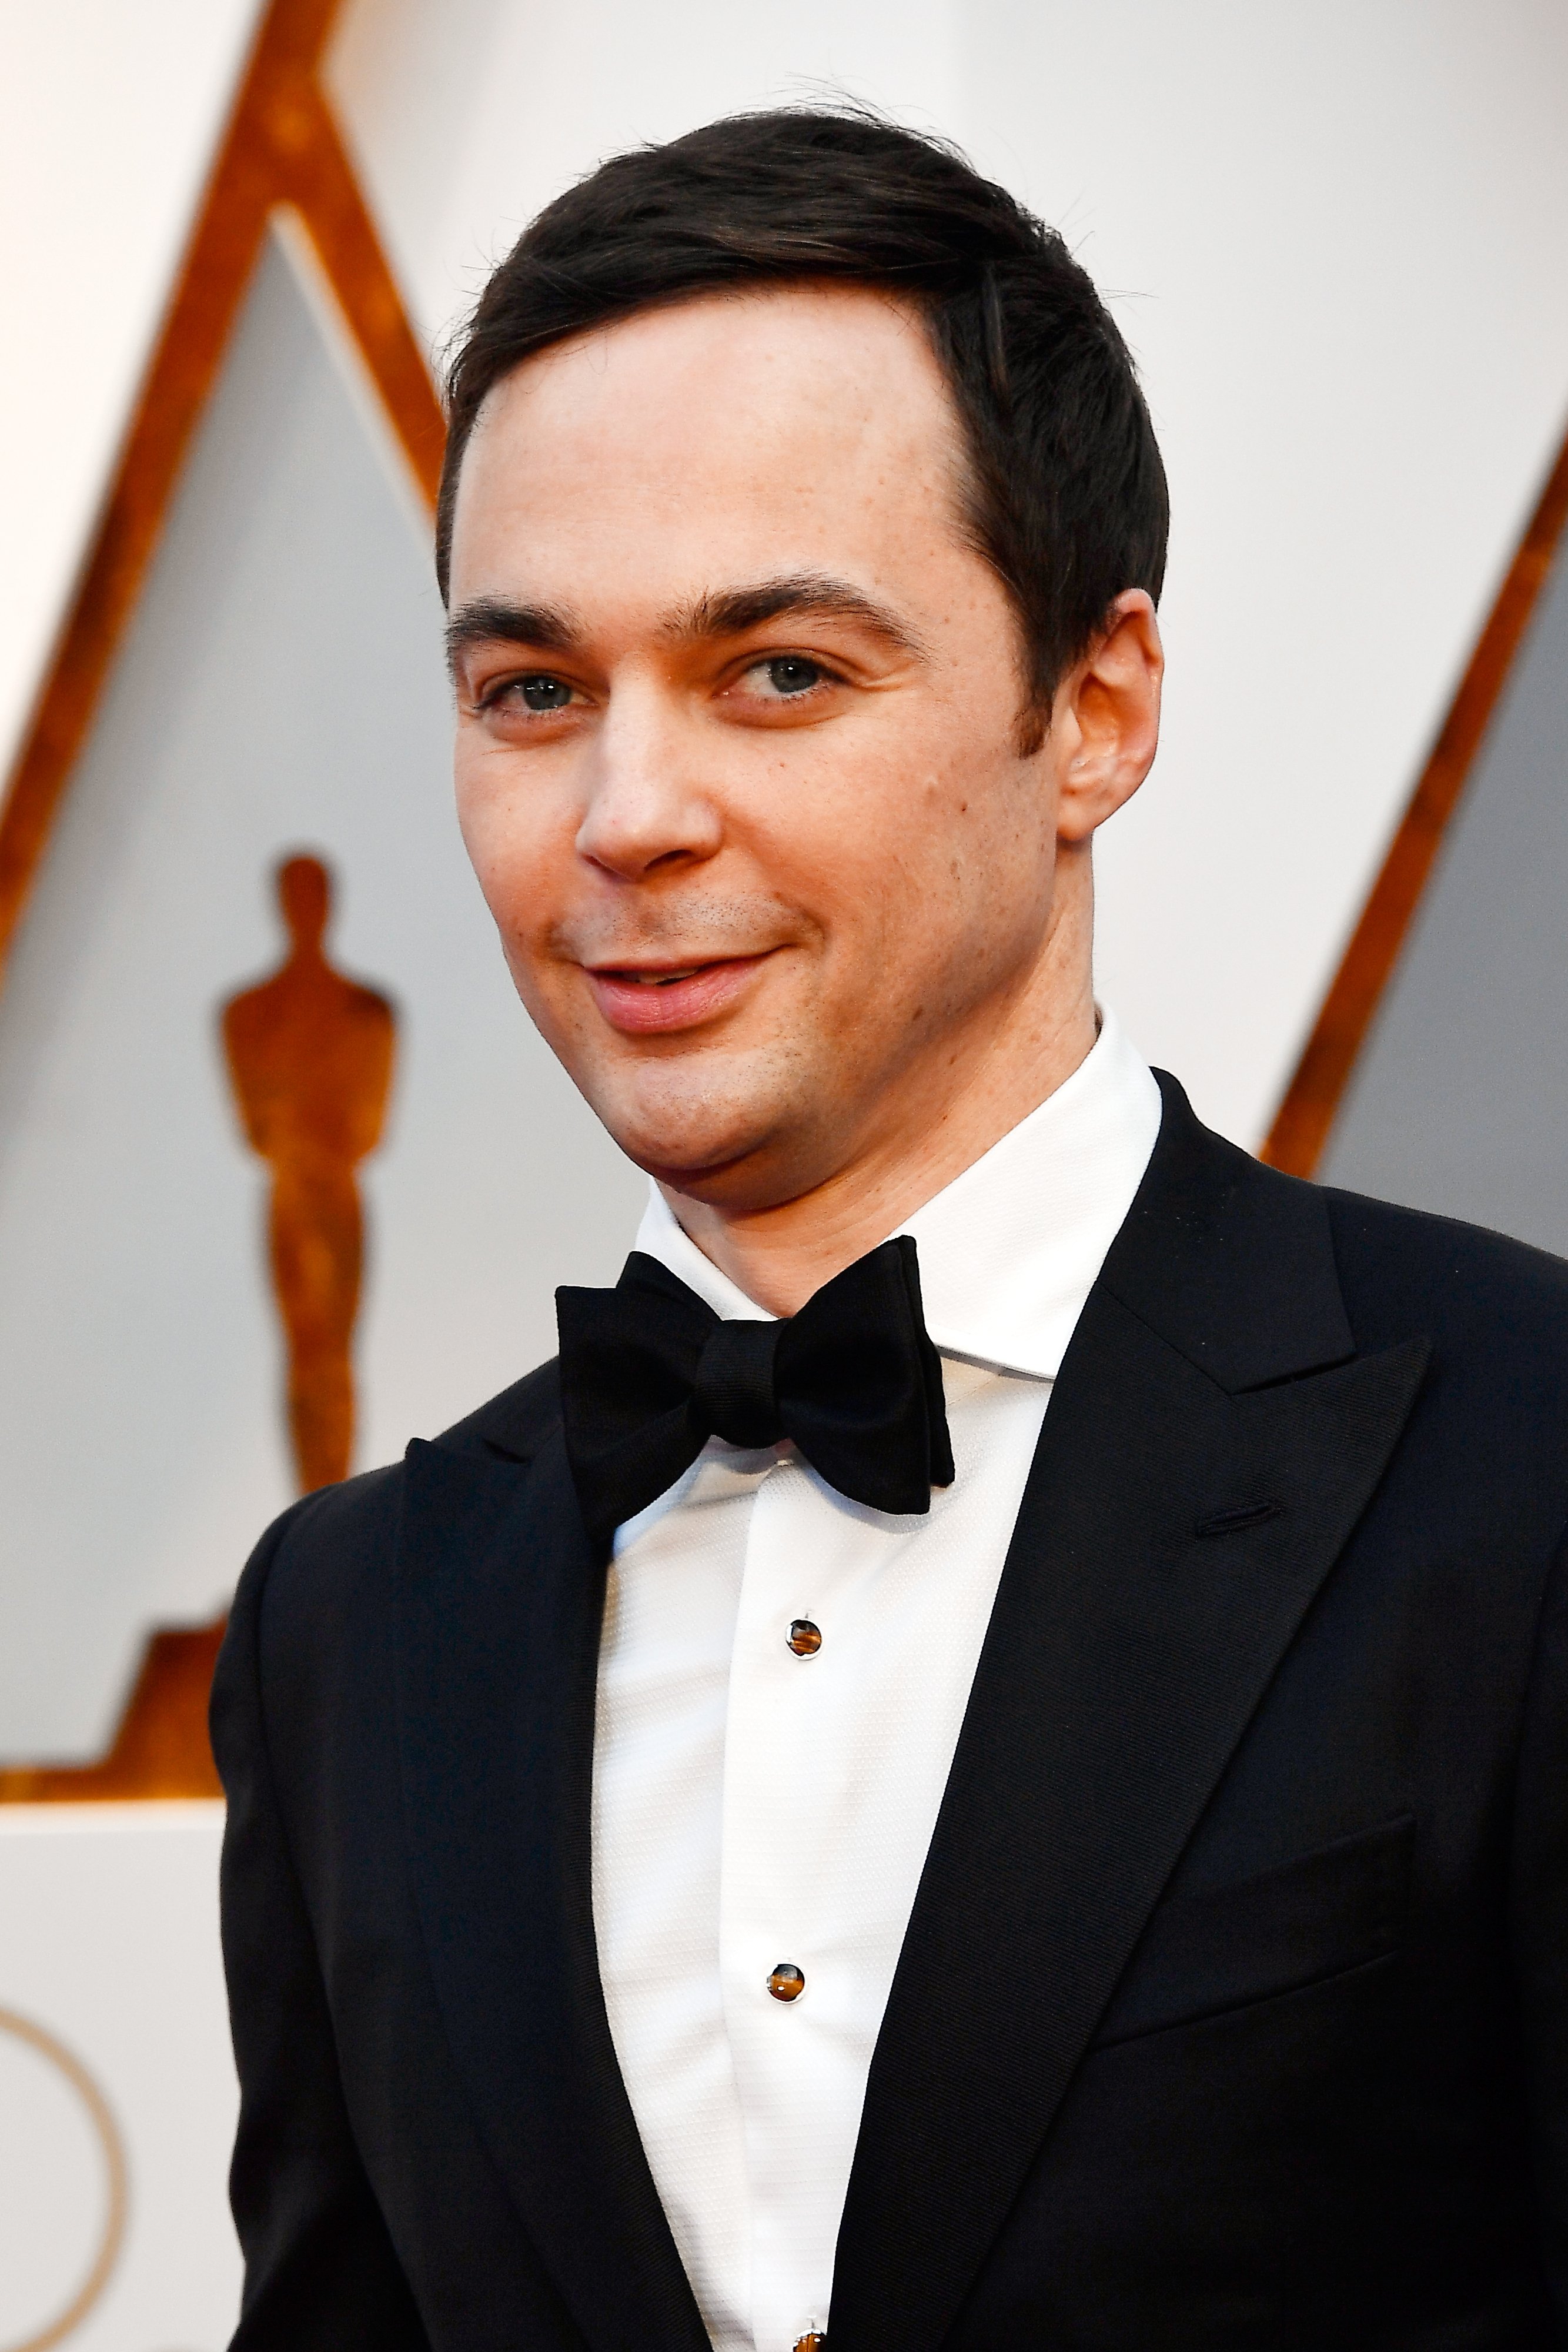 Jim Parsons attends the 89th Annual Academy Awards at Hollywood & Highland Center on February 26, 2017. | Photo: GettyImages